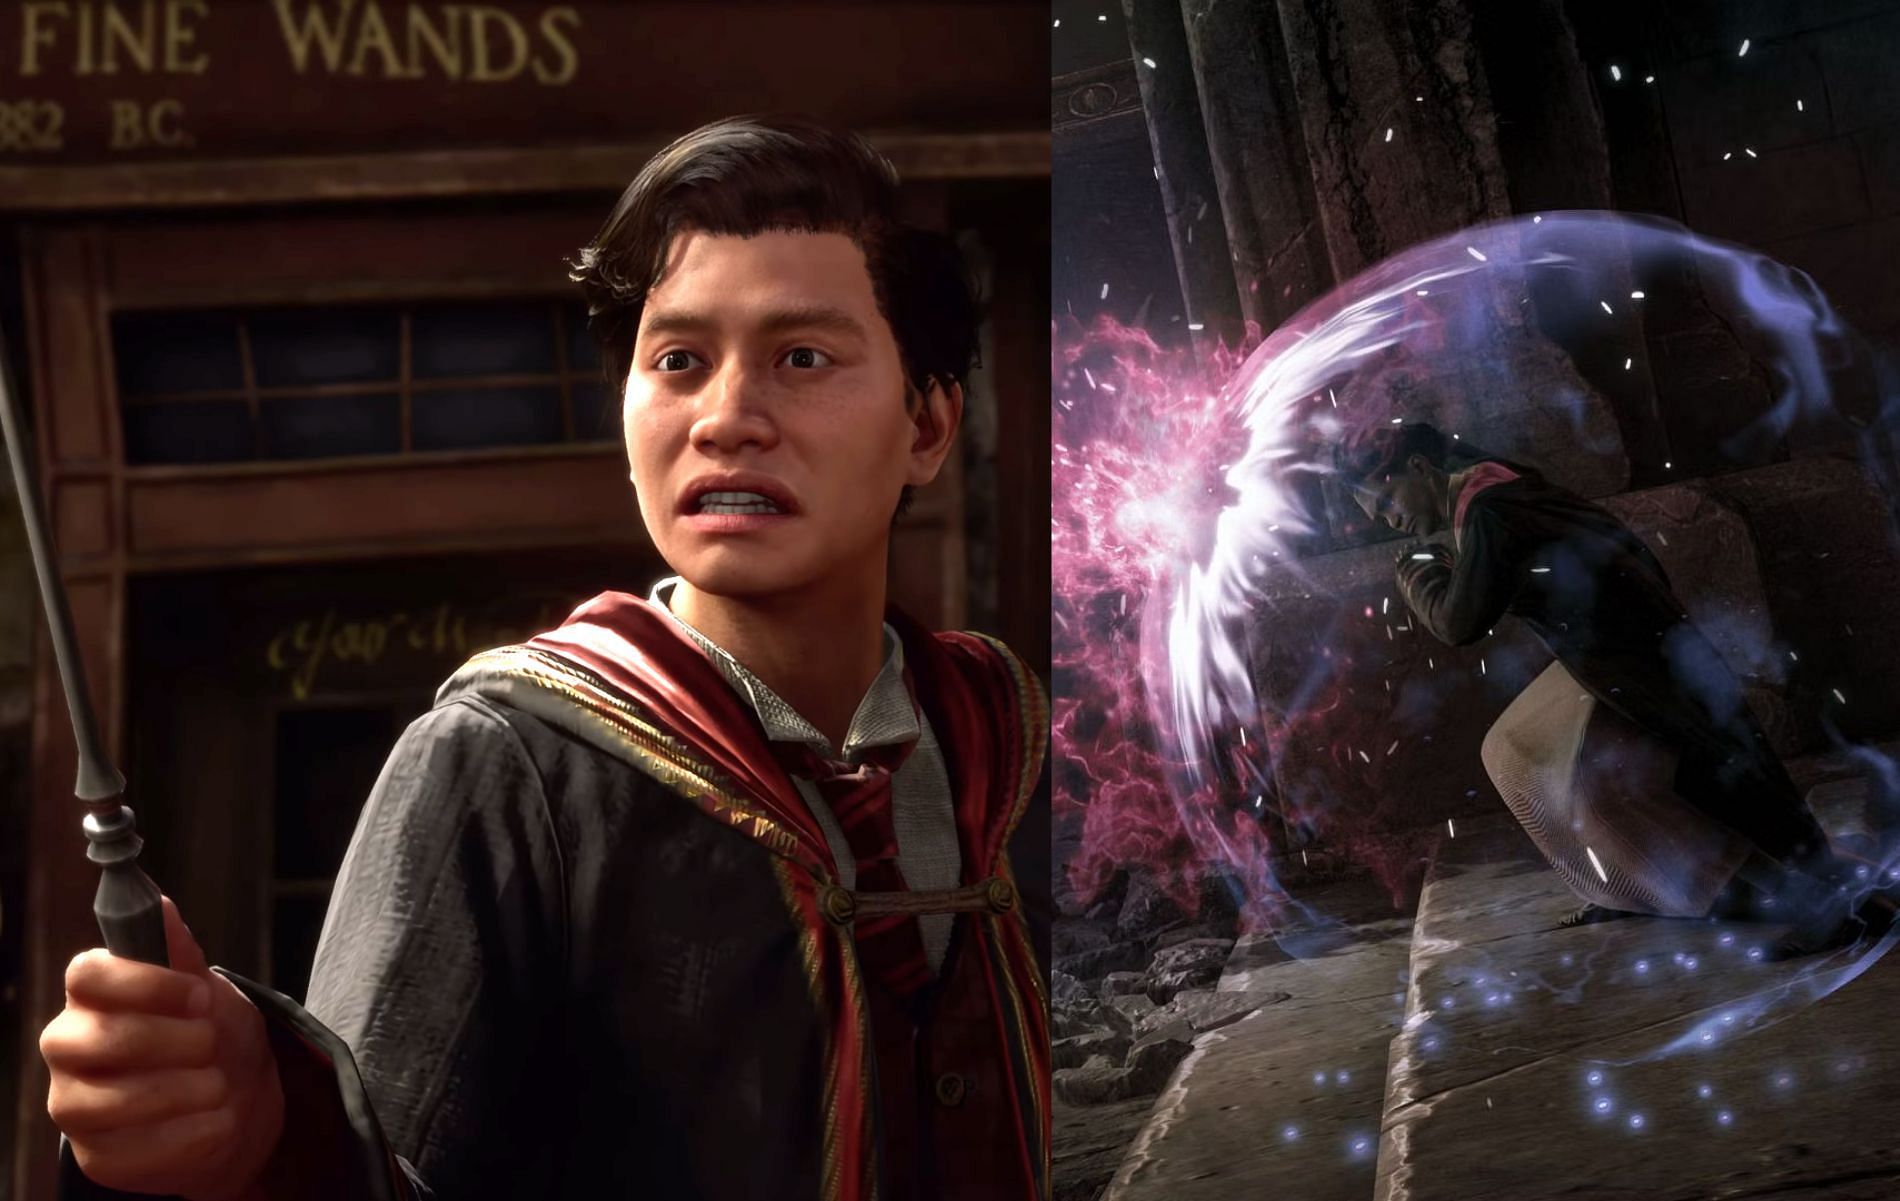 Players can freely customize their wands but does this have an effect on the gameplay? (Images via Warner Bros Interactive Entertainment)